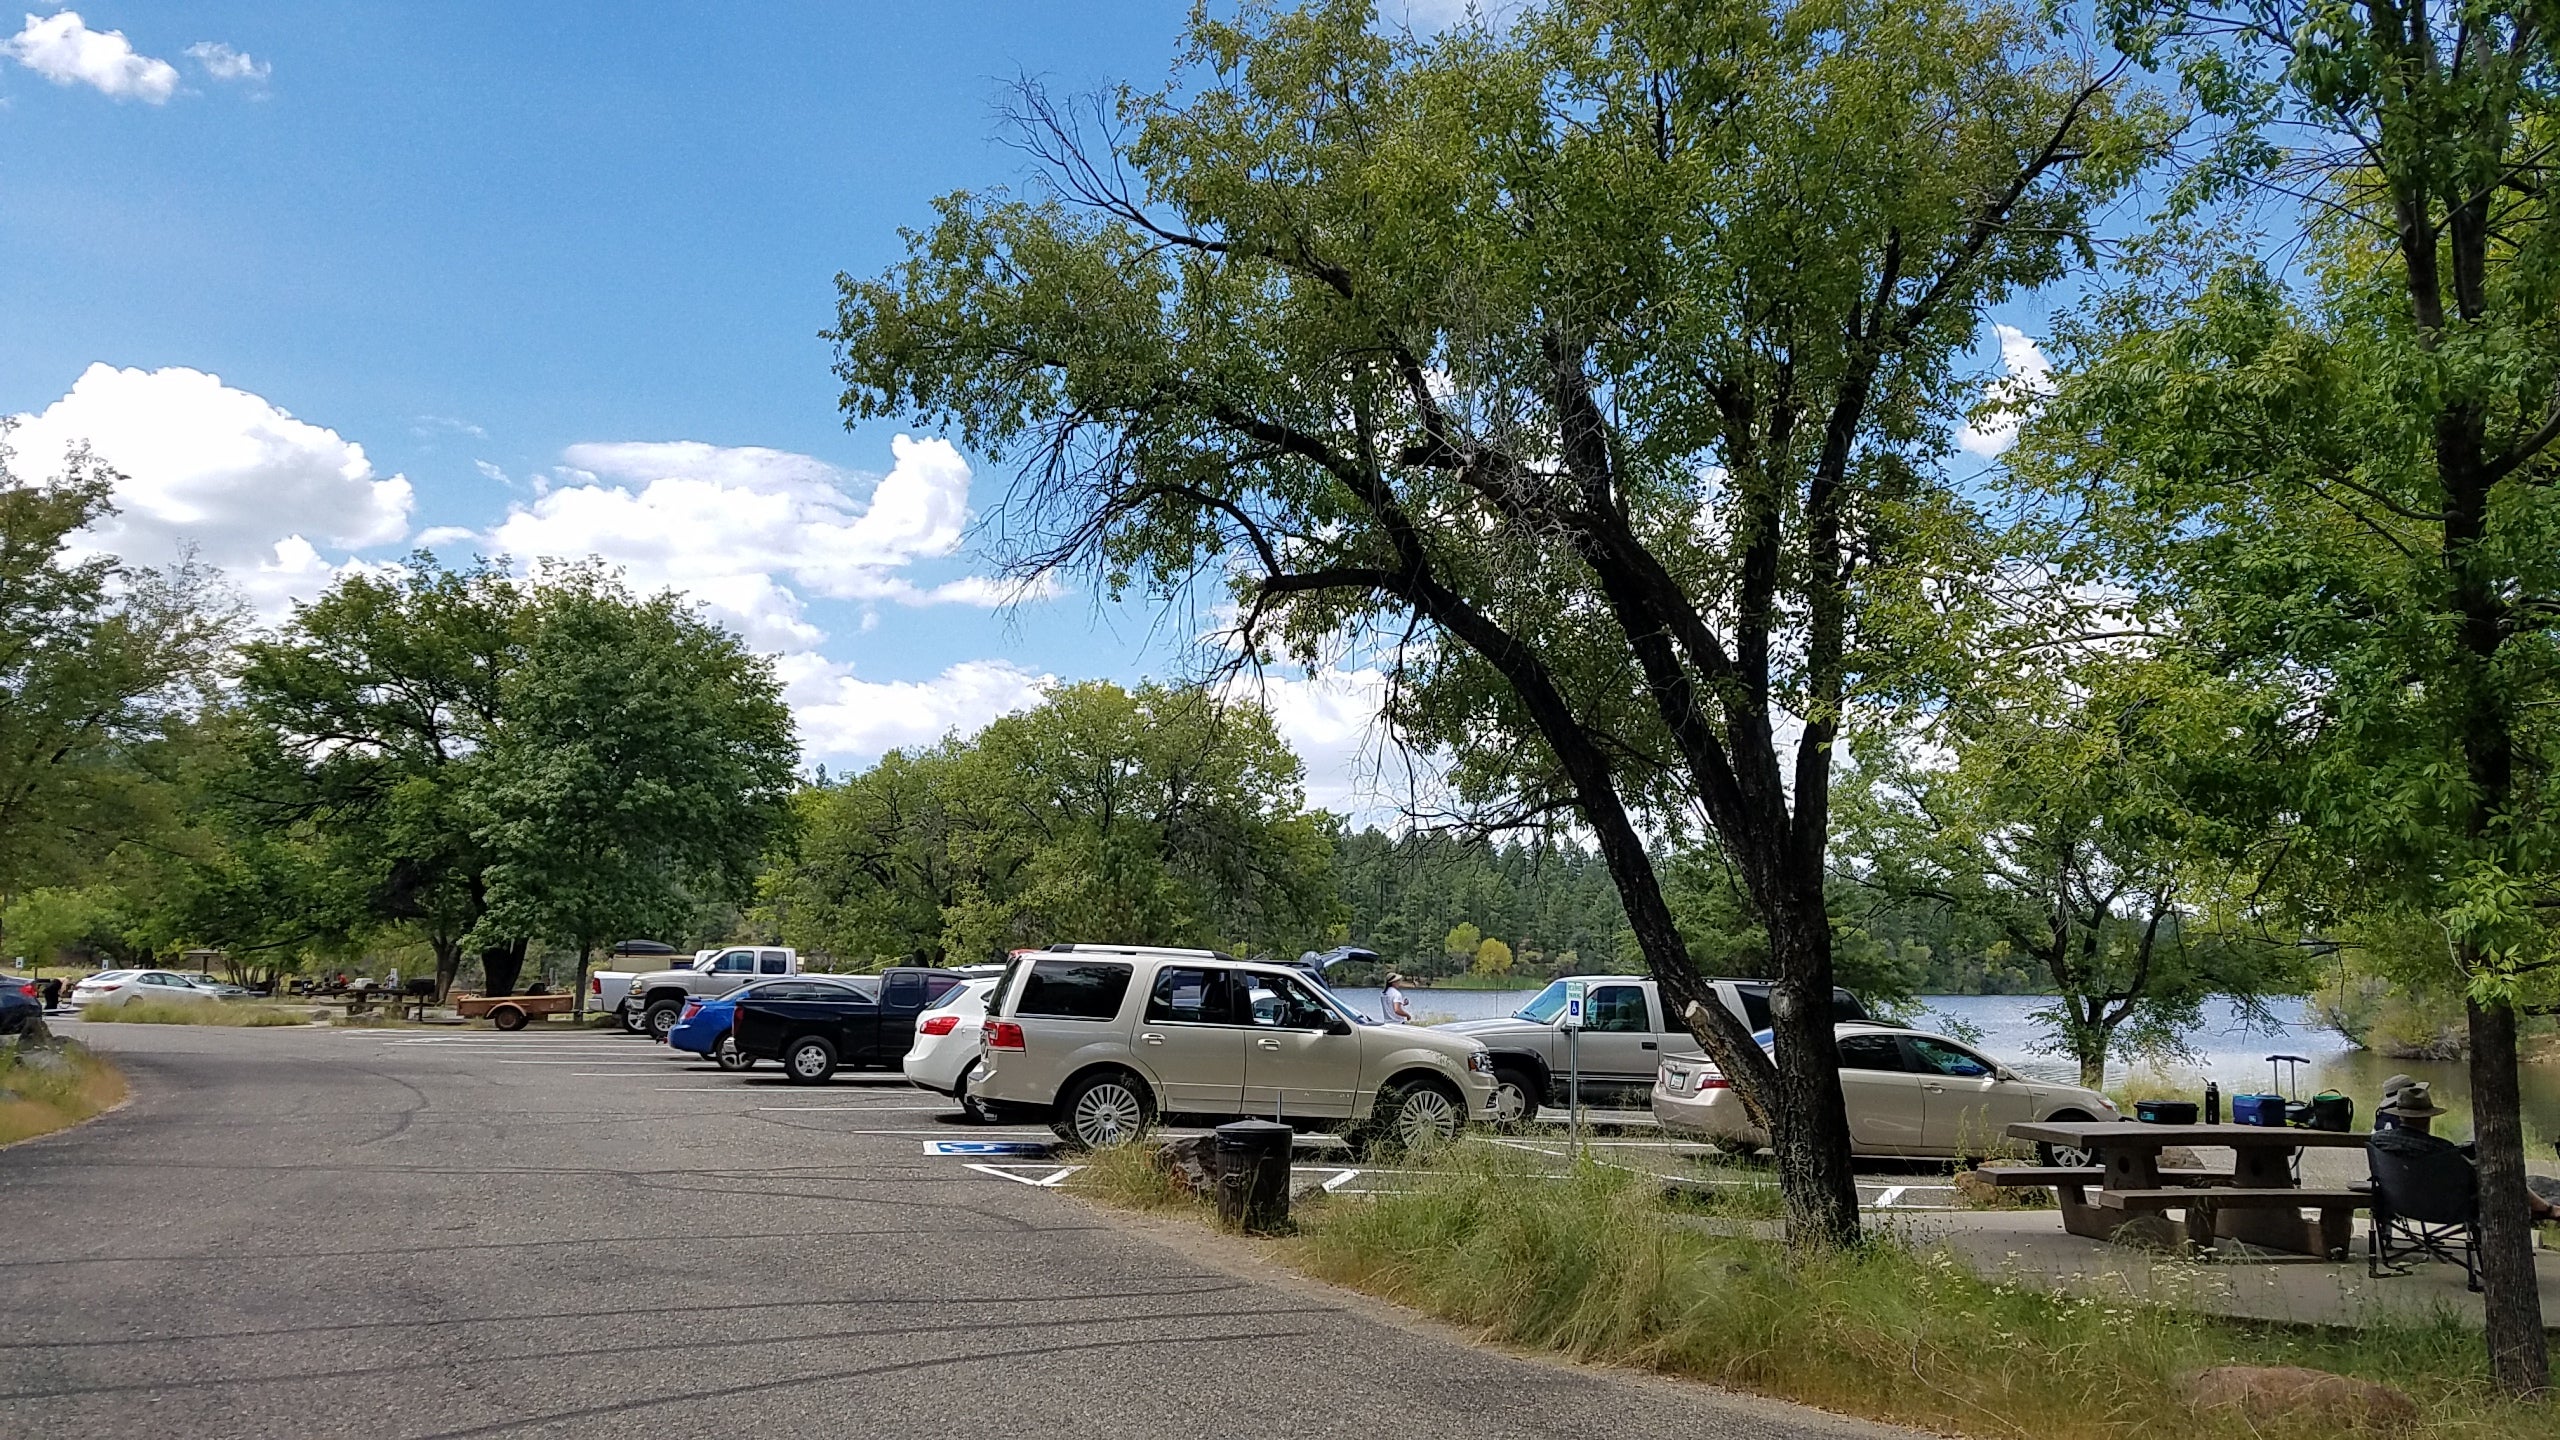 Day use parking at Lynx Lake...$5 per vehicle for day use (not included in camping fees)